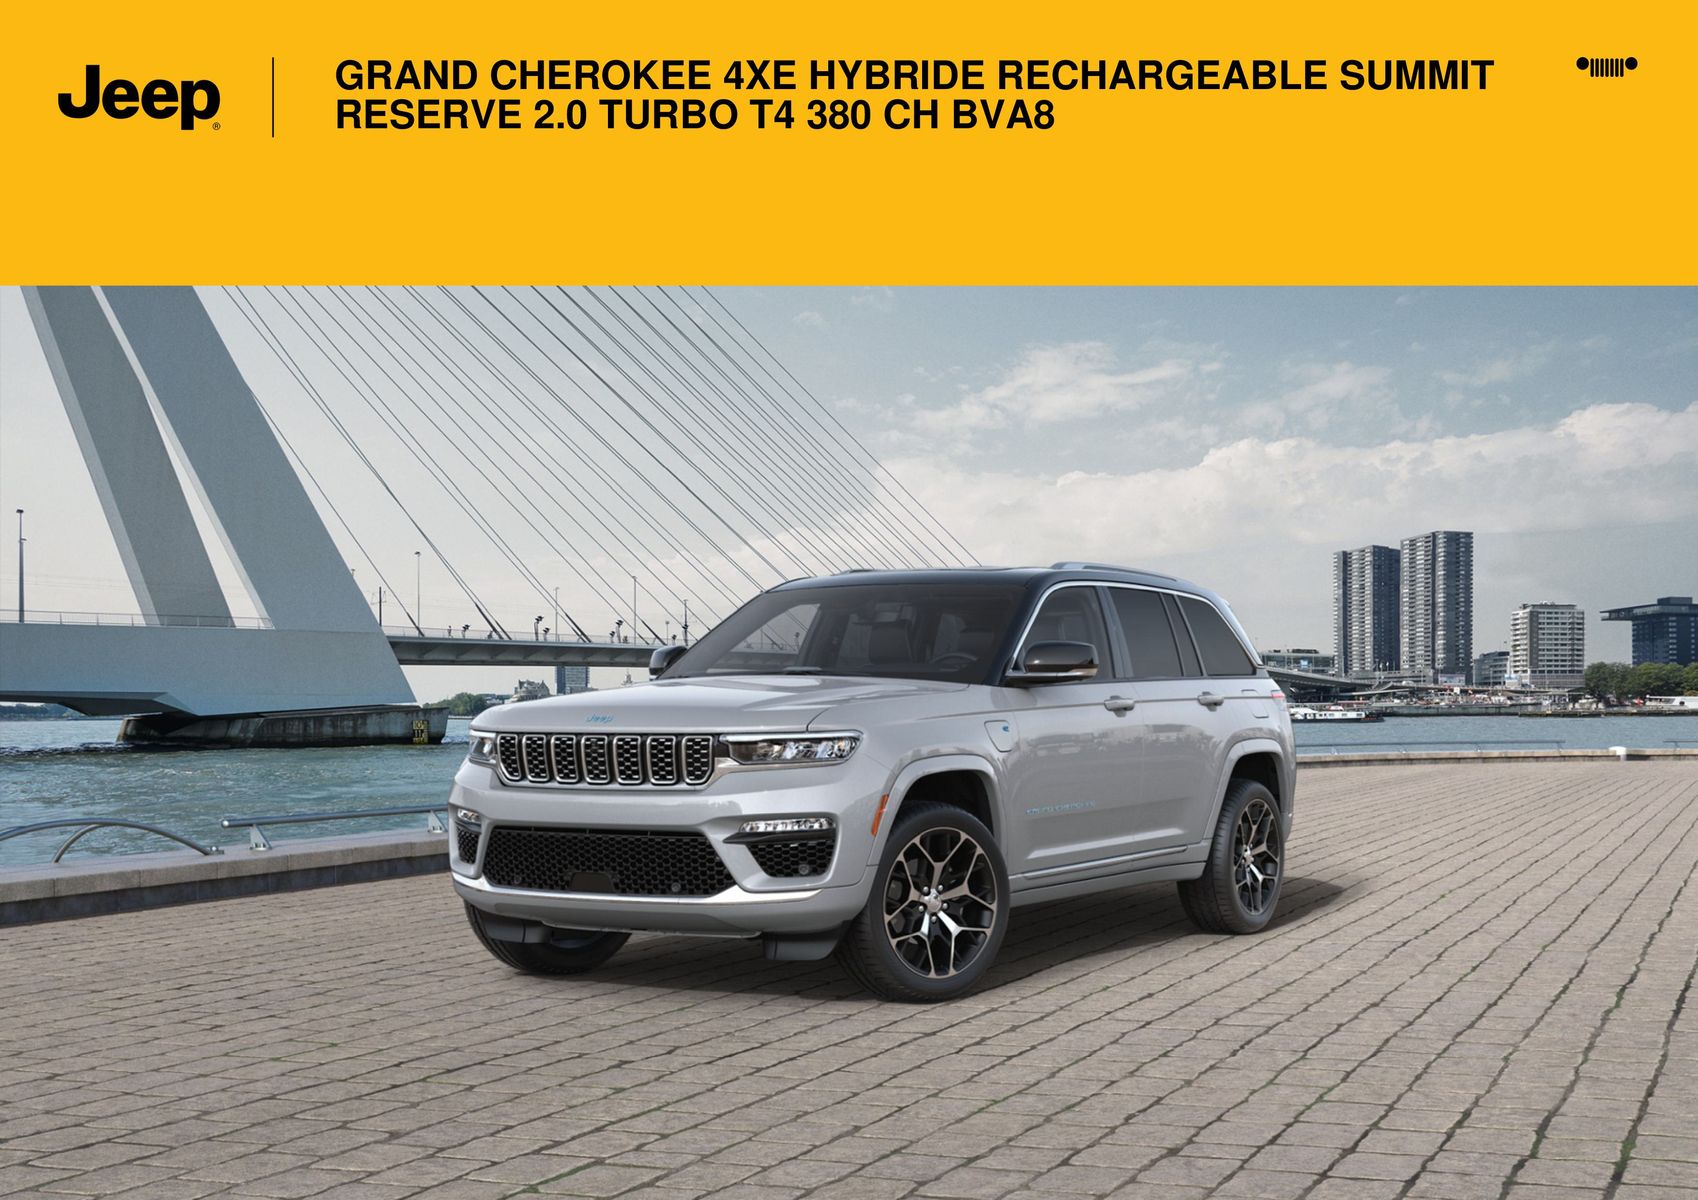 Catalogue GRAND CHEROKEE 4XE HYBRIDE RECHARGEABLE SUMMIT RESERVE 2.0 TURBO T4 380 CH BVA8, page 00001